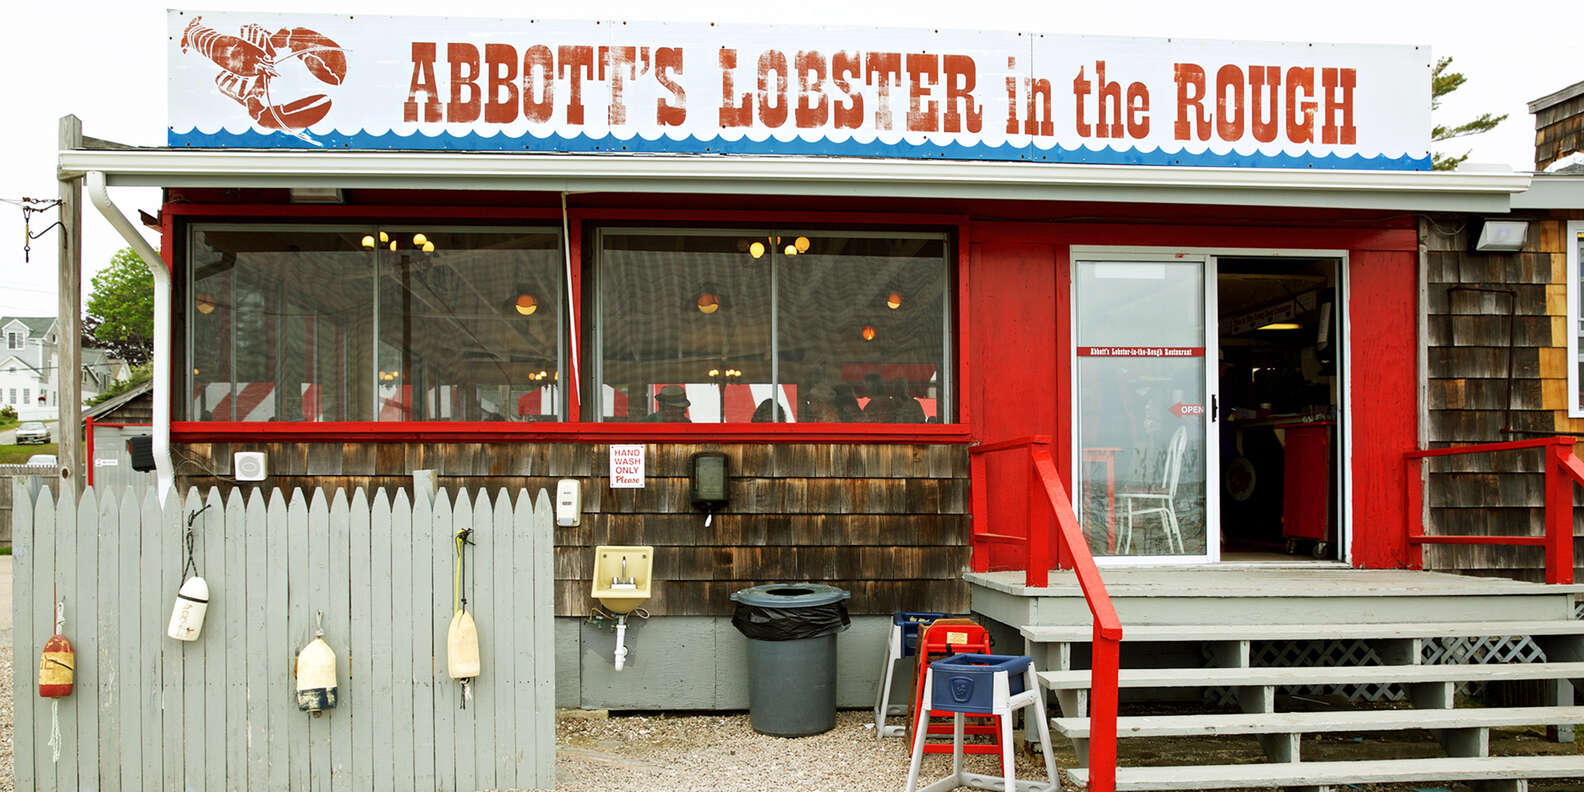 Best Fresh Seafood Restaurant On the Water in the US - Thrillist